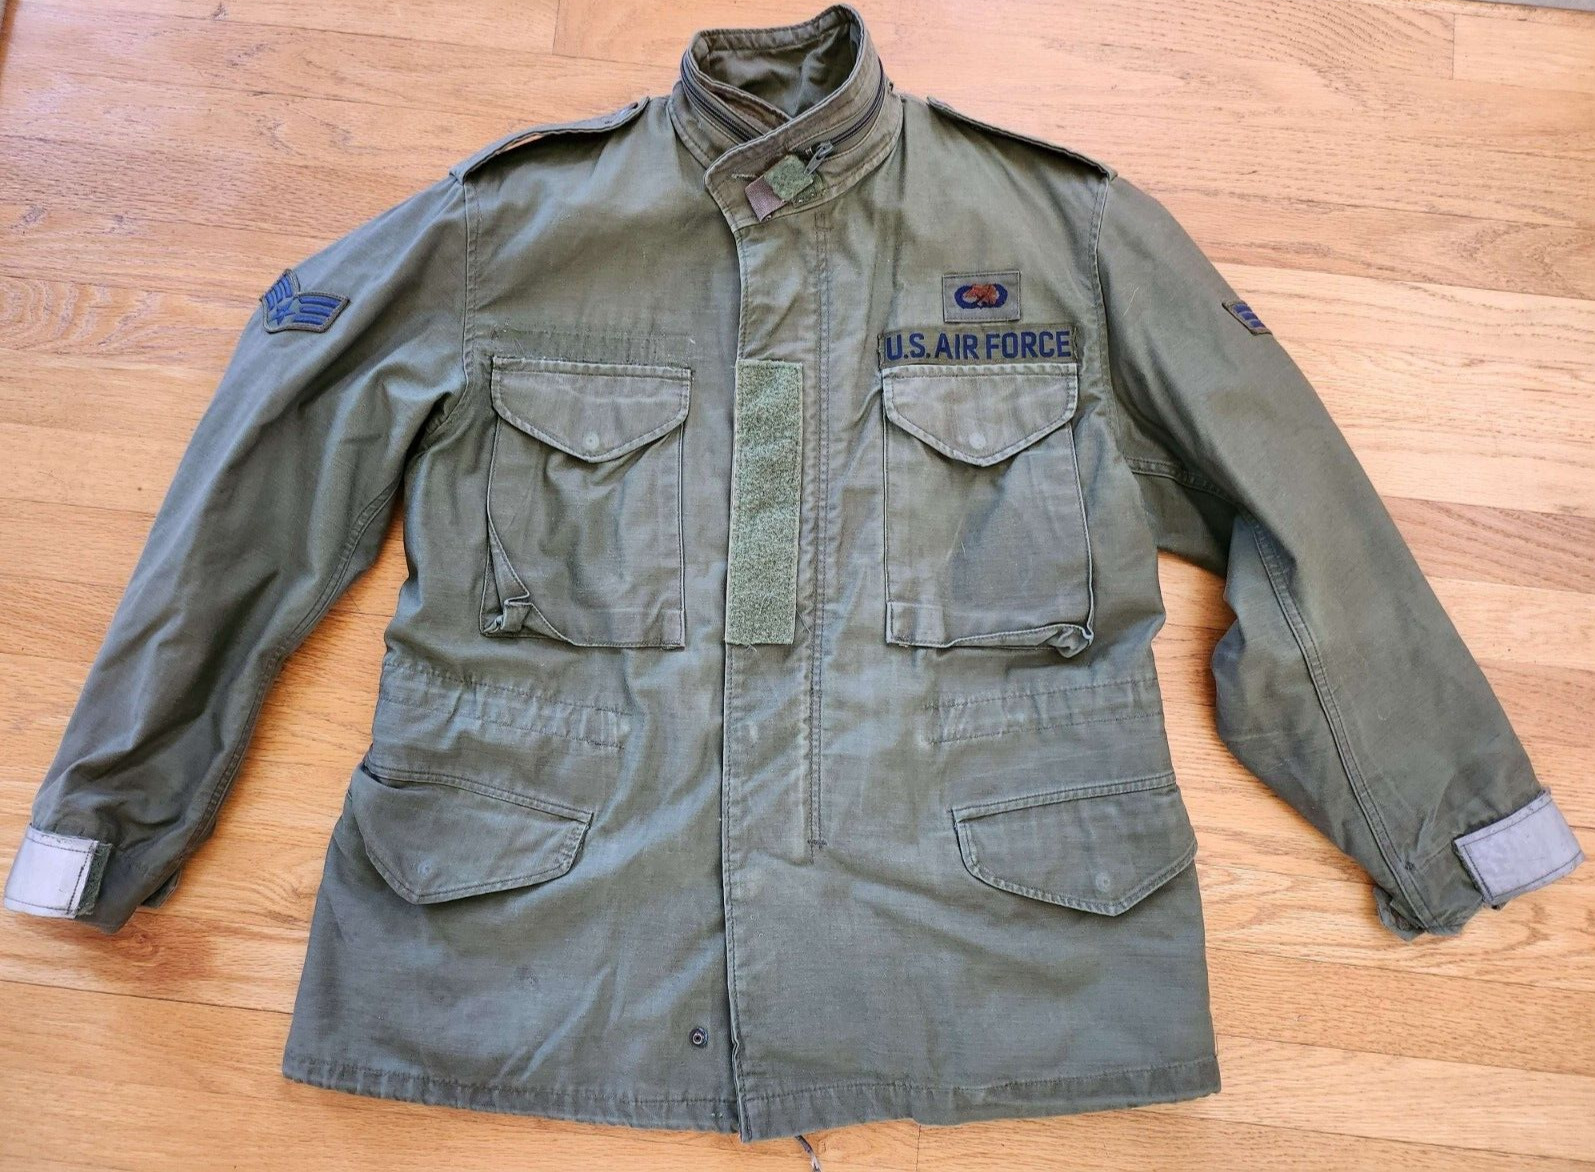 Vintage 1985 U.S. Air Force Patched M-65 Field Jacket Green Size Medium Short